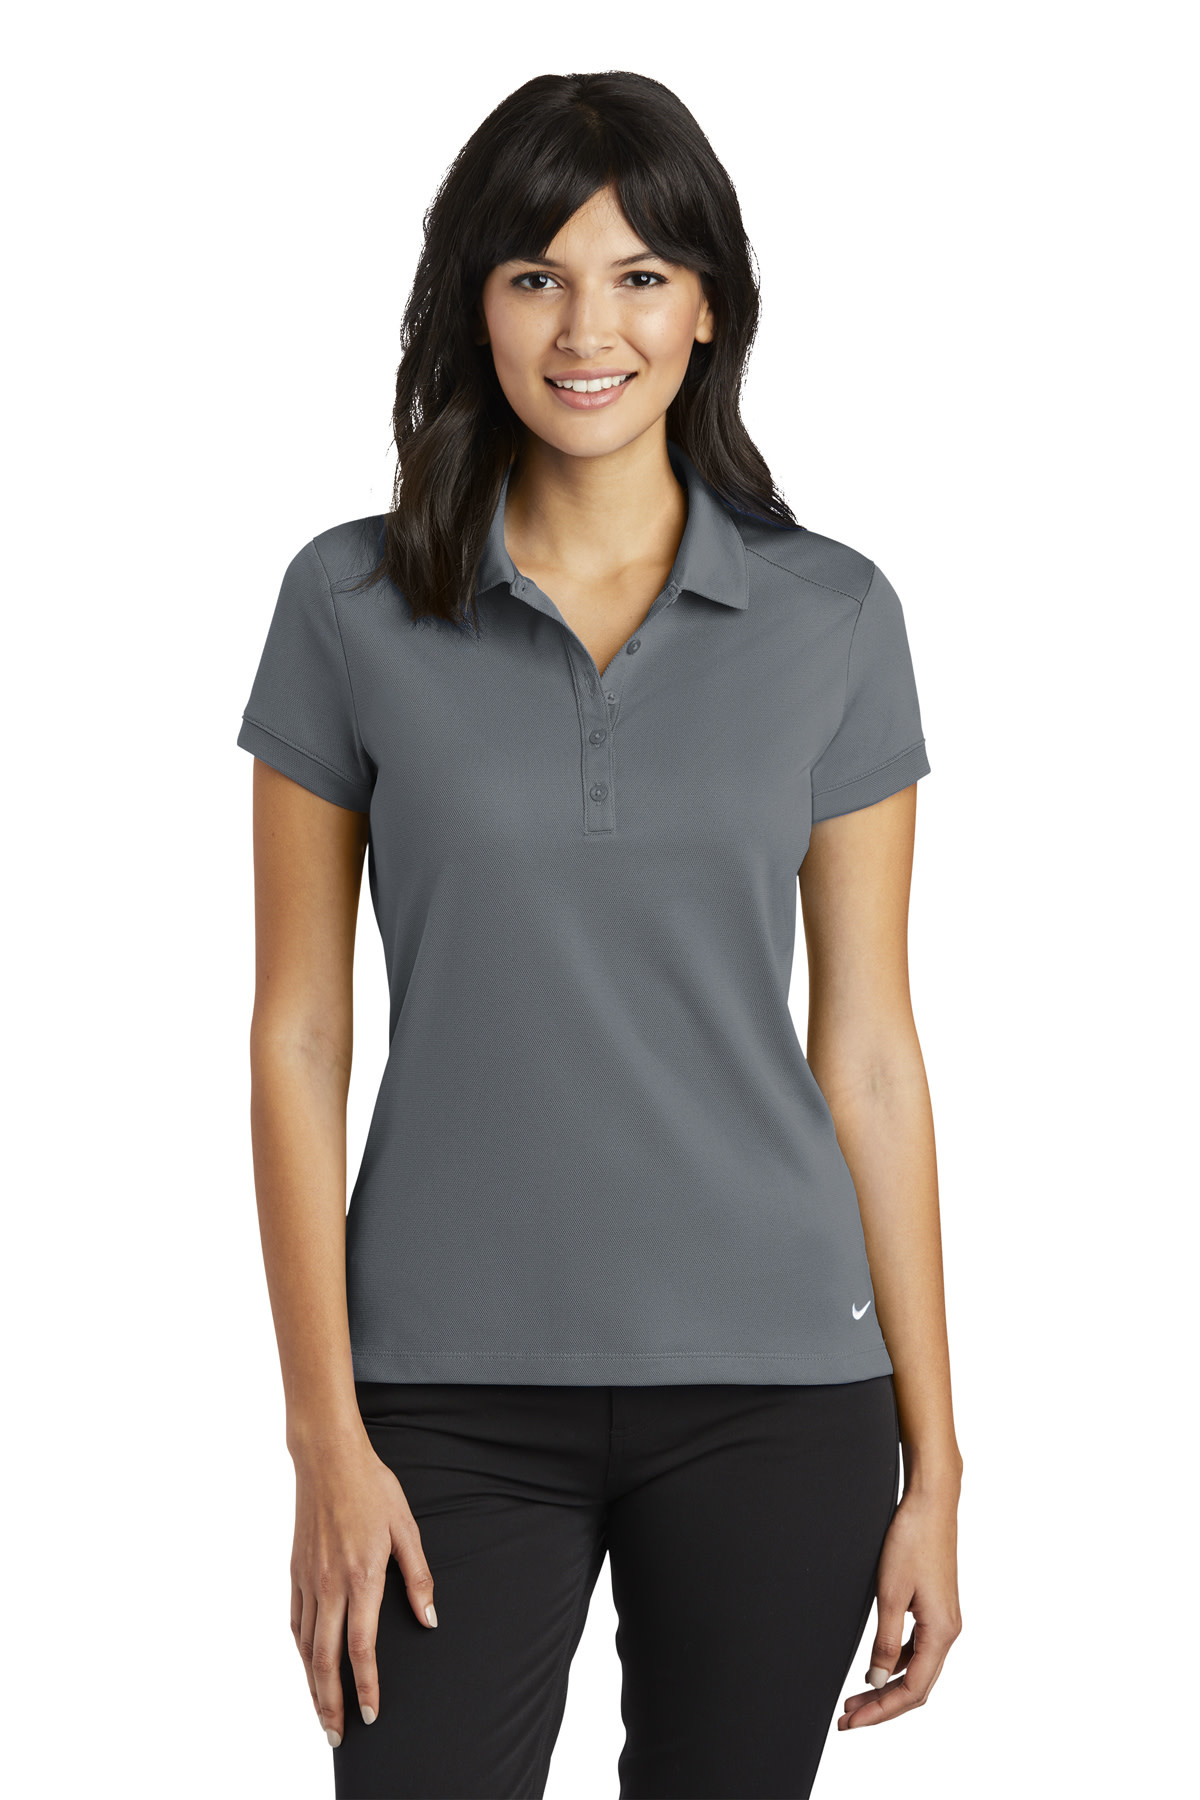 Ladies Nike Dri-FIT Solid Icon Pique Modern Fit Polo DWH